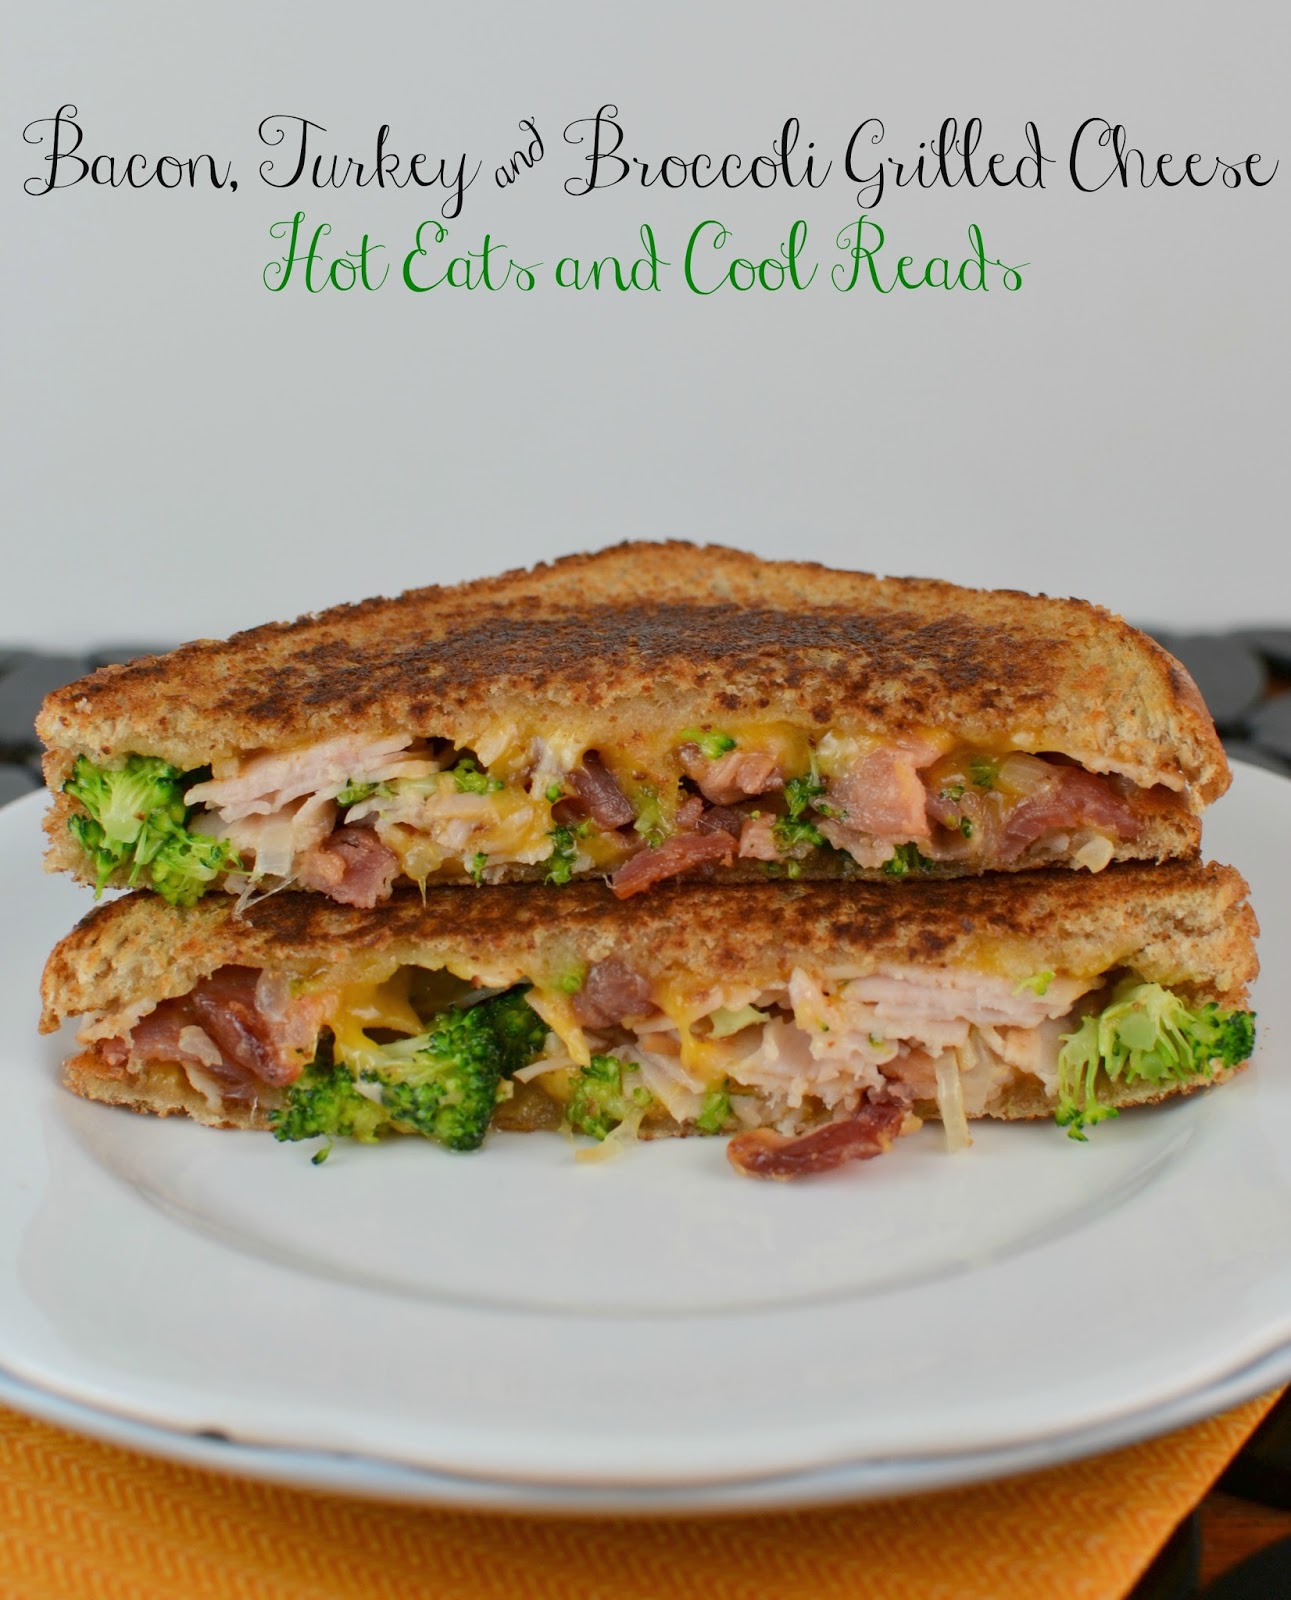 This recipe is perfect for any grilled cheese lover! Full of bacony, cheesy goodness! Turkey, Broccoli and Cheddar Grilled Cheese Sandwich from Hot Eats and Cool Reads!